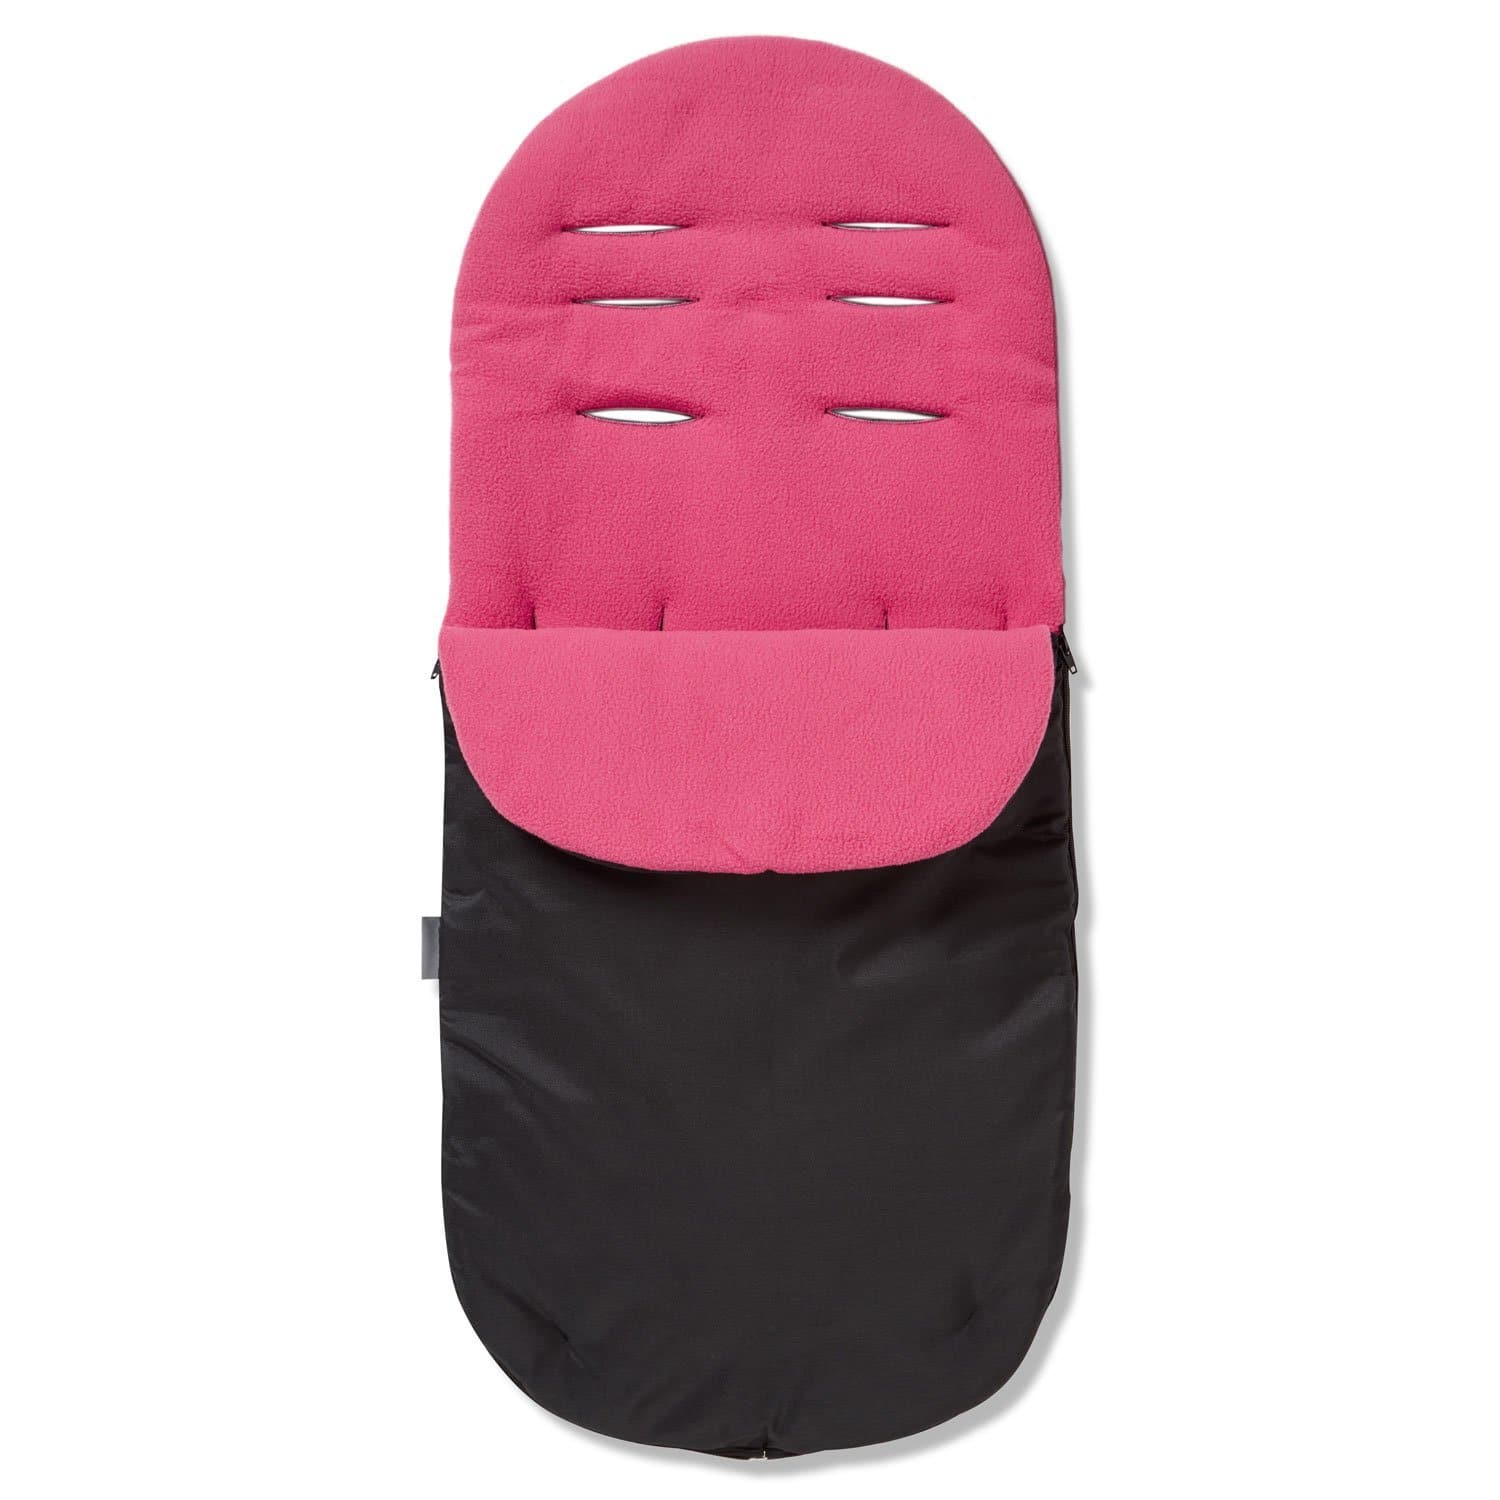 Footmuff / Cosy Toes Compatible with Seed - For Your Little One